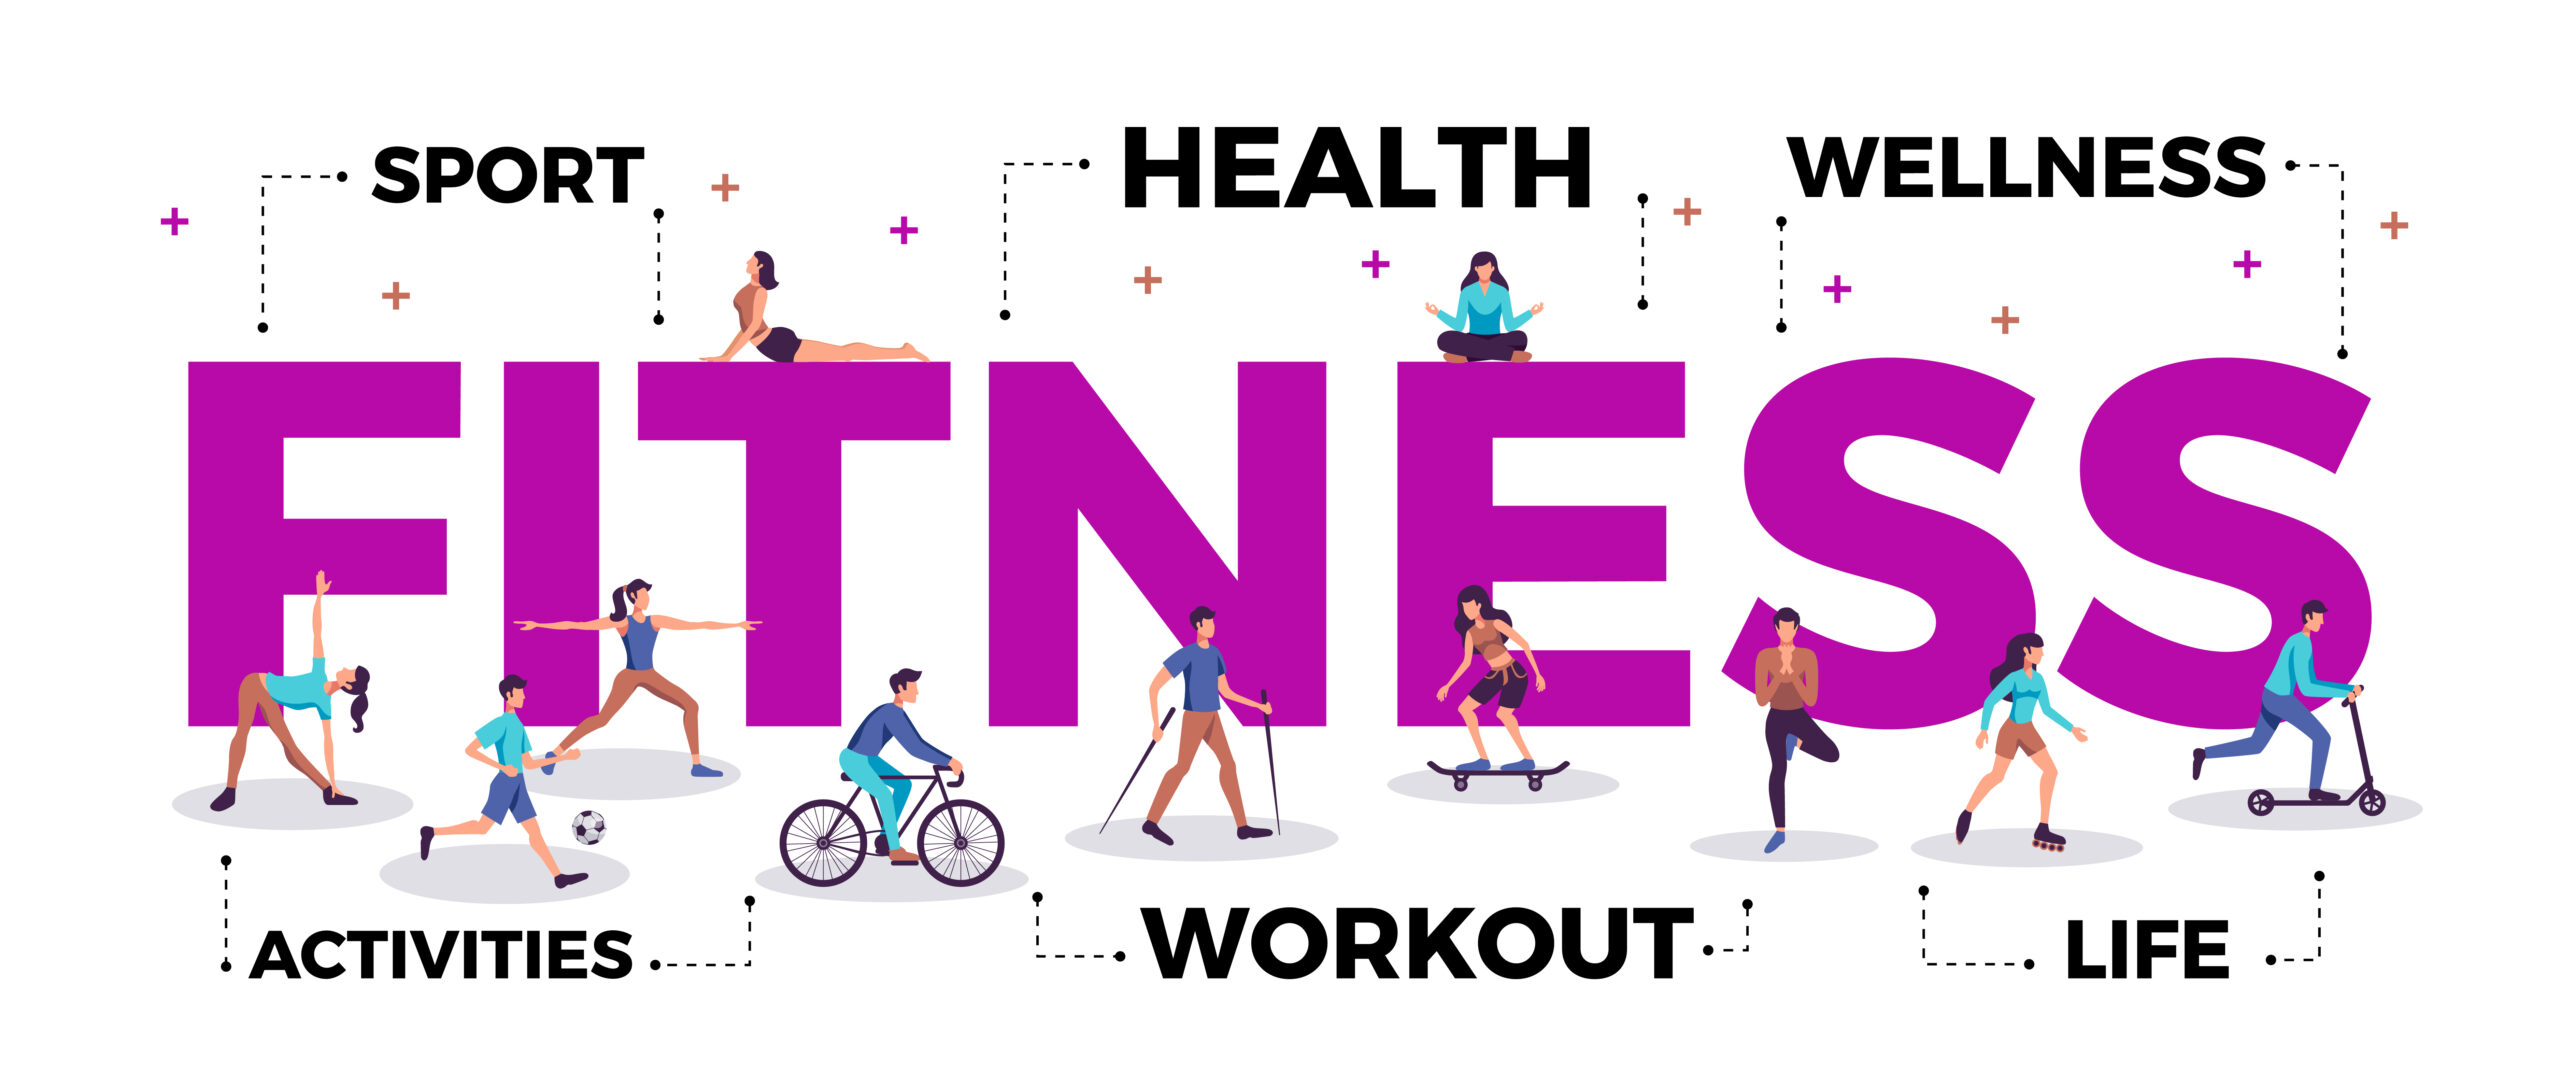 Best Activity to Get more fit: Accomplish Your Wellness Objectives